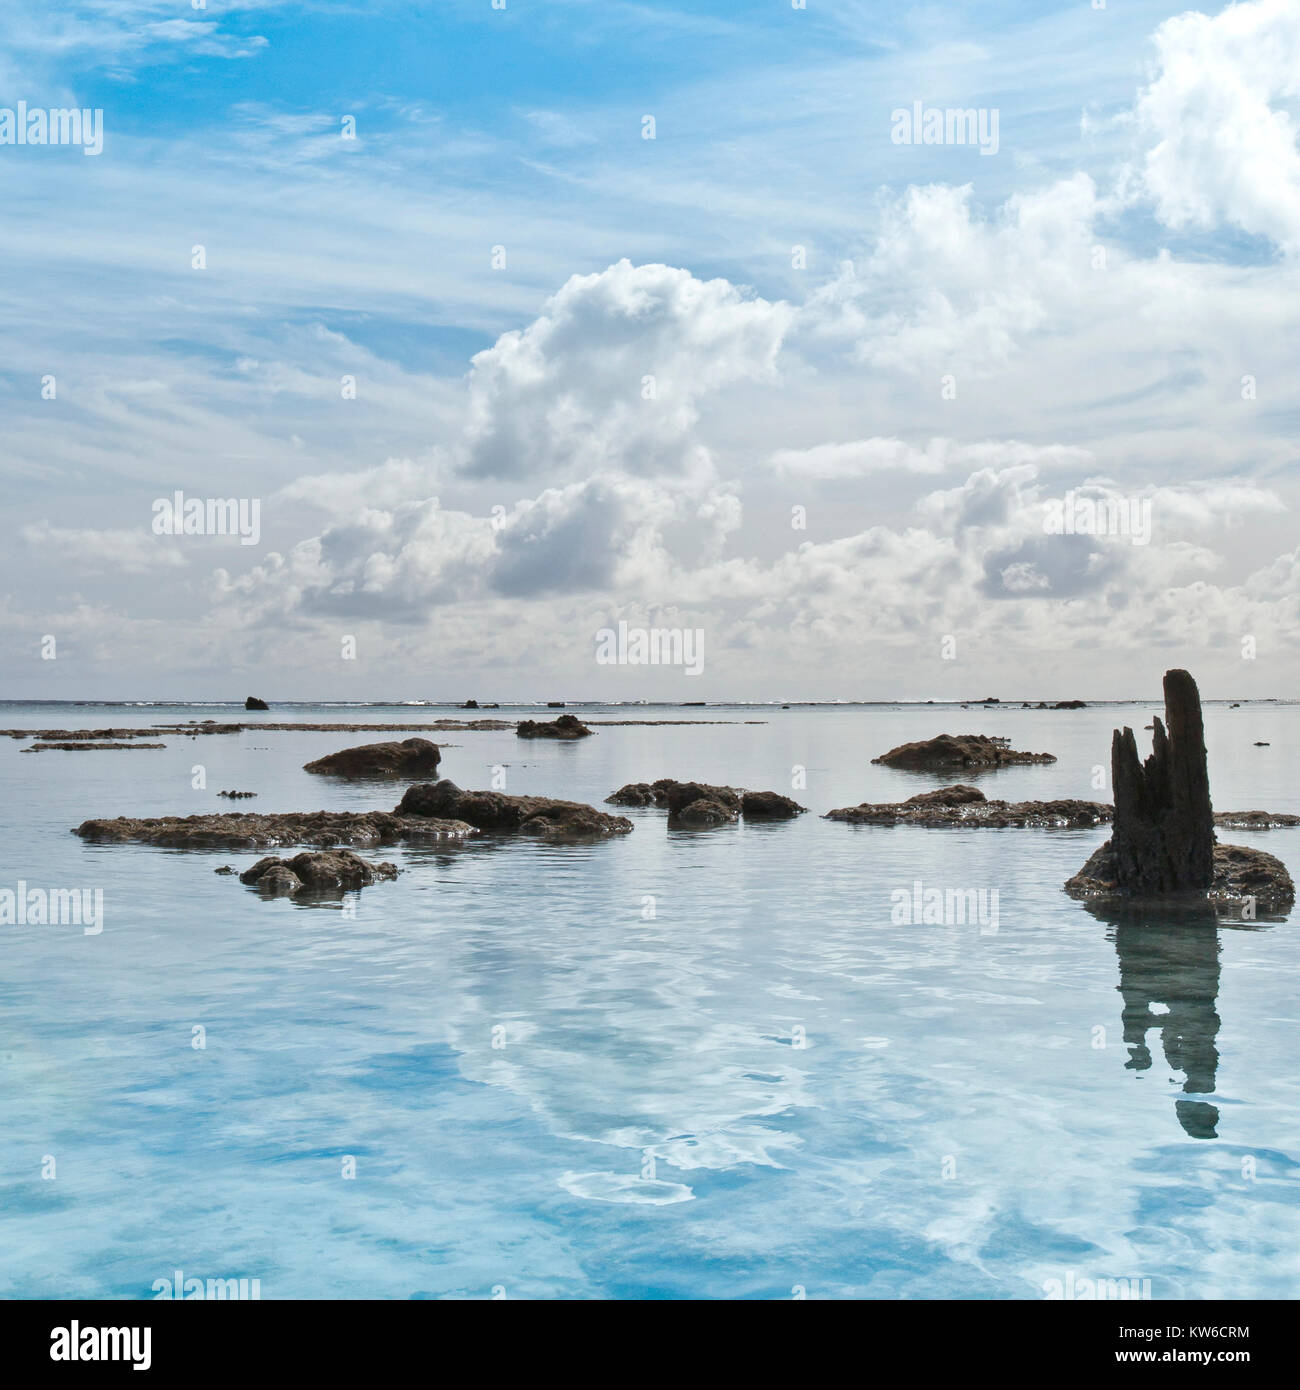 sun sea and sand scapes from the south pacific cook islands Rarotonga and one foot island with dramatic rock formations and reflections Stock Photo